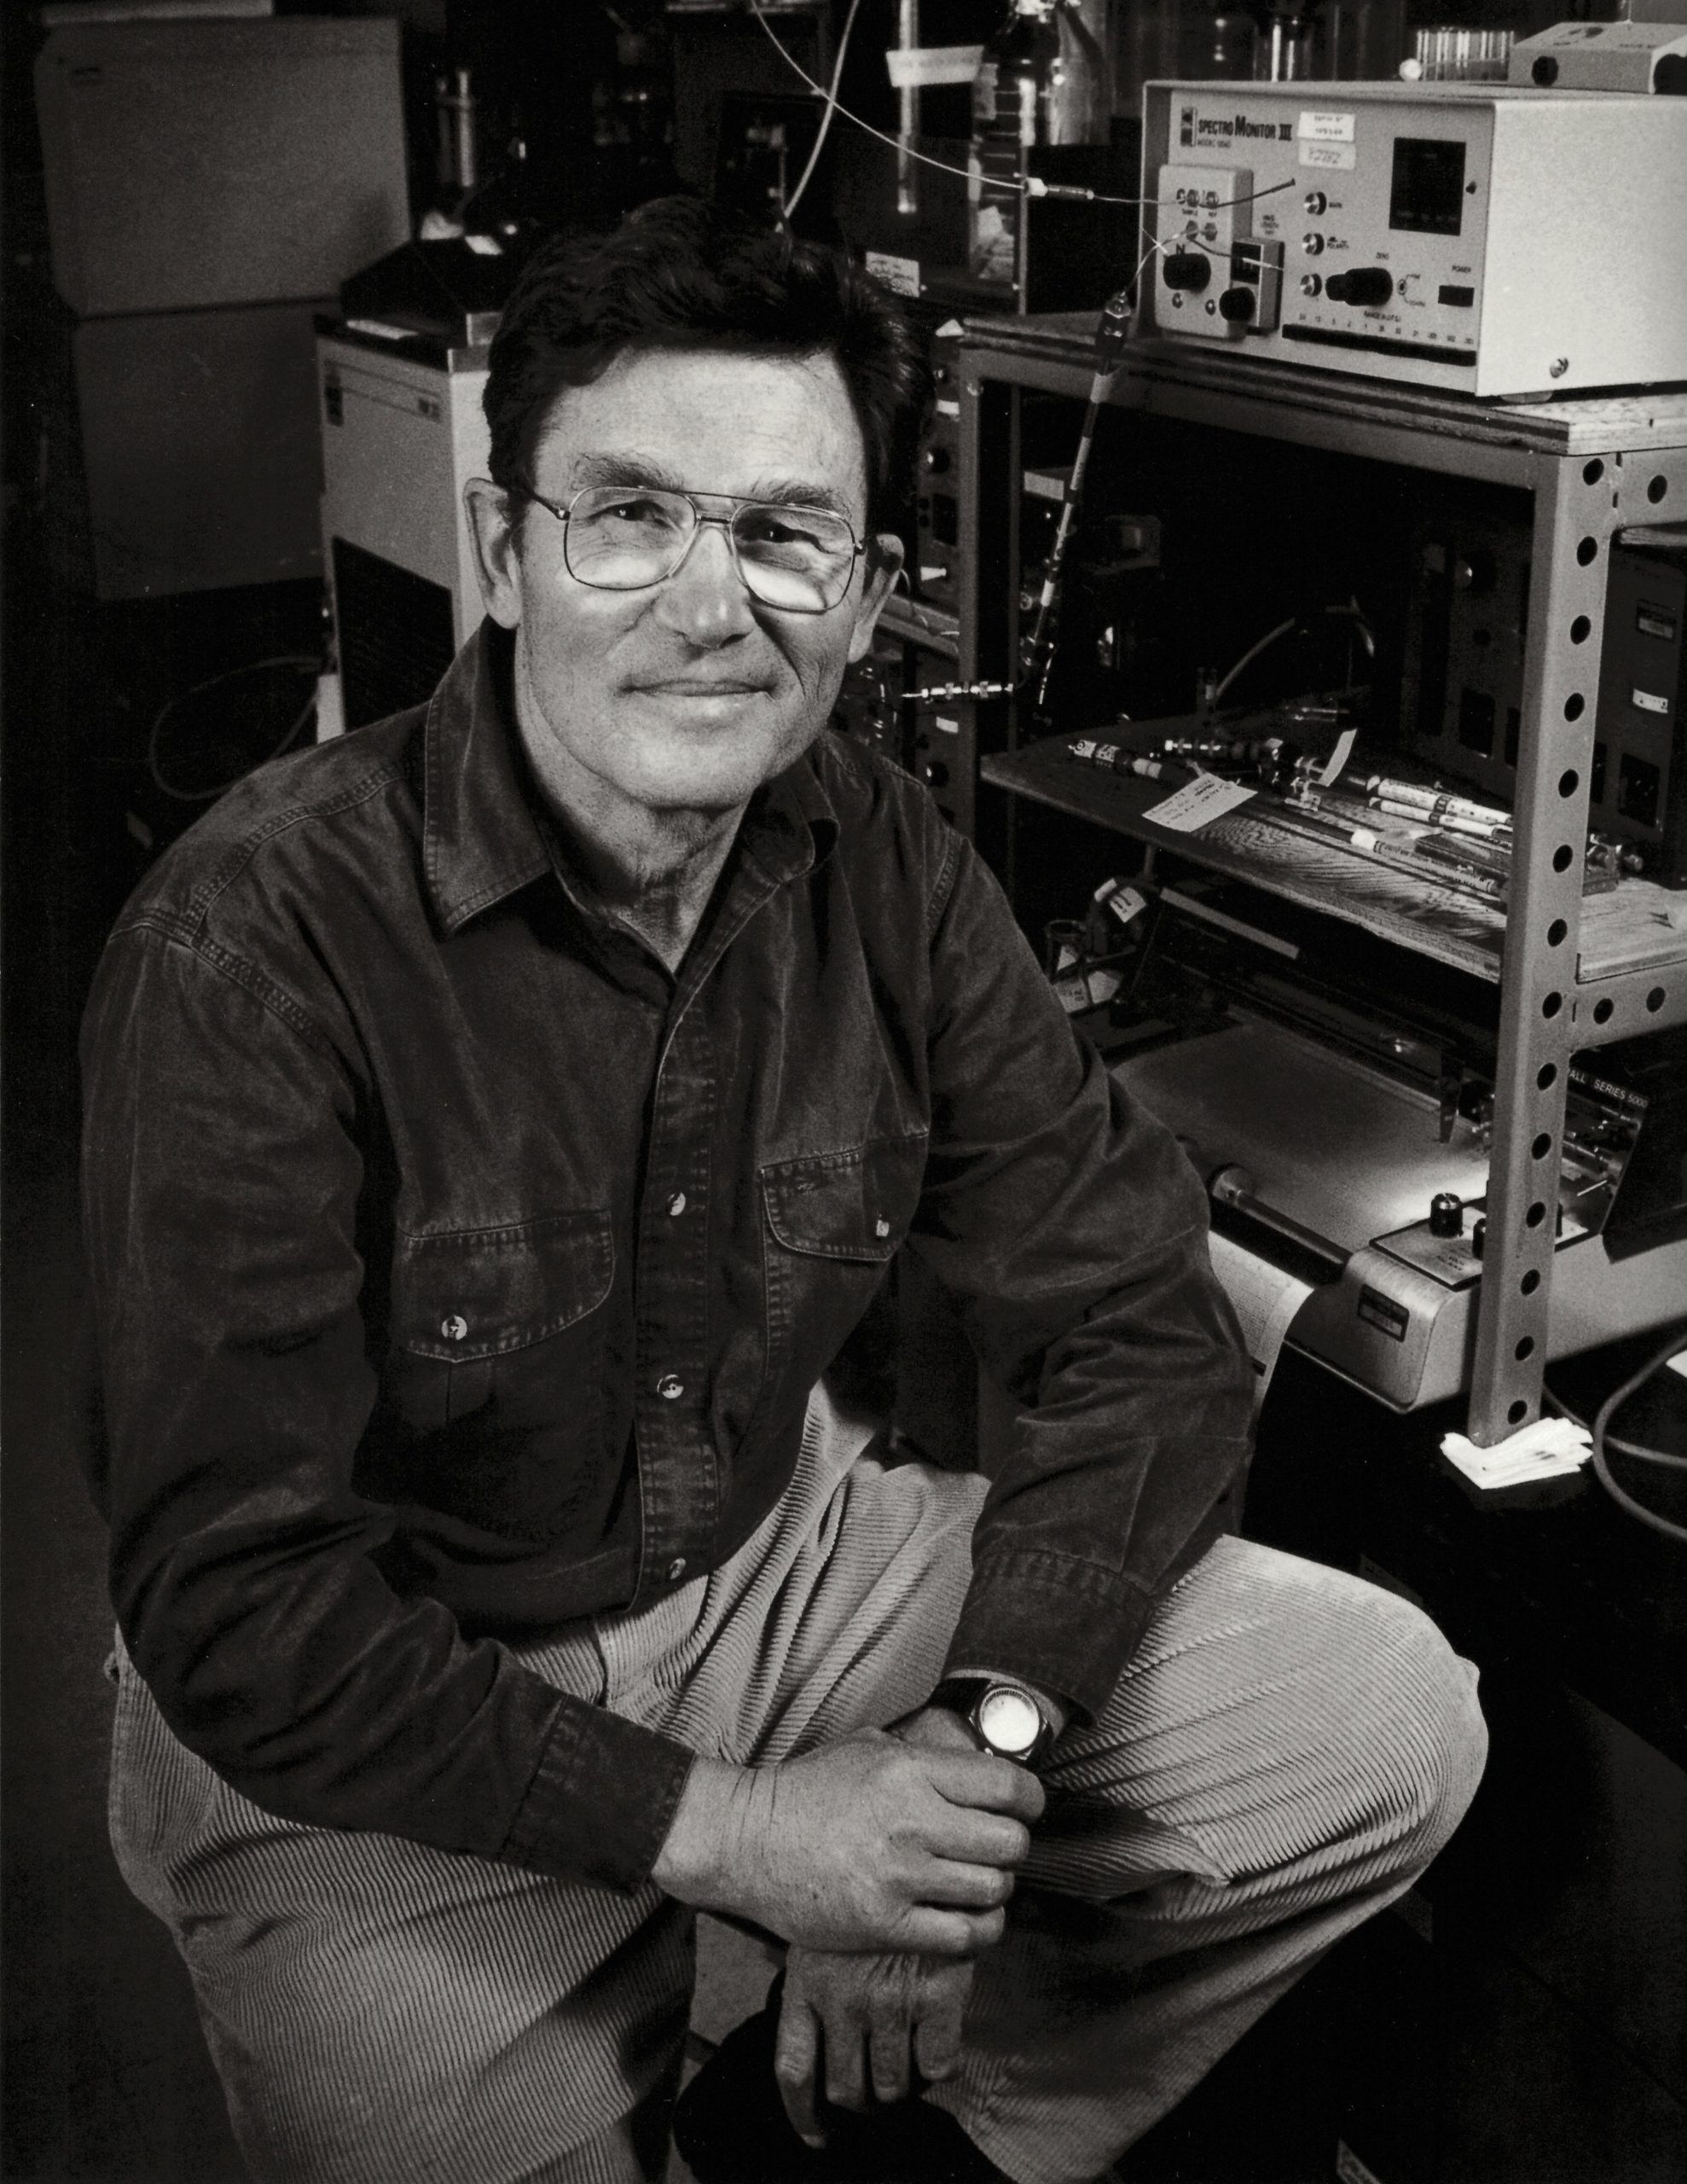 A black and white photo of Vlado Macko sitting on a stoll in front of some scientific equipment.